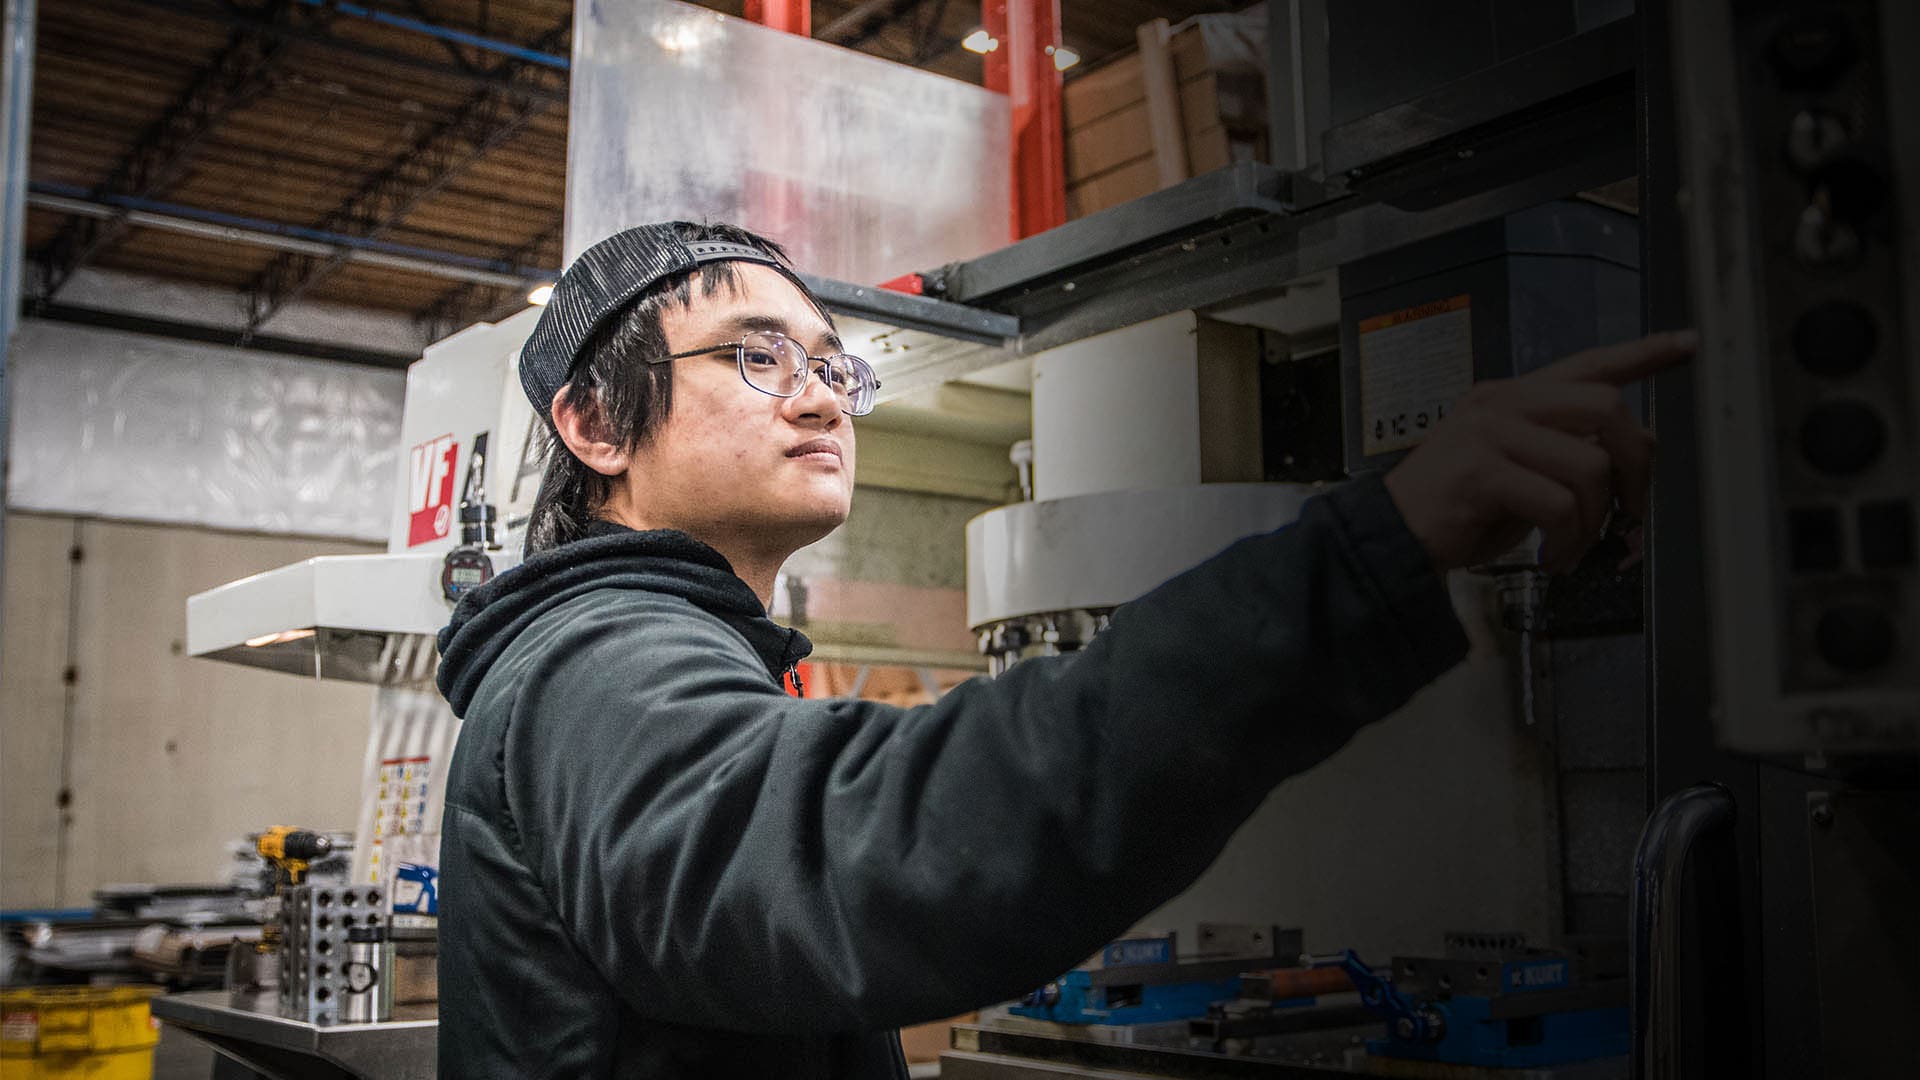 An AJAC Youth Apprentice operates a HAAS VF4 mill during his on-the-job training at American Structures and Design.